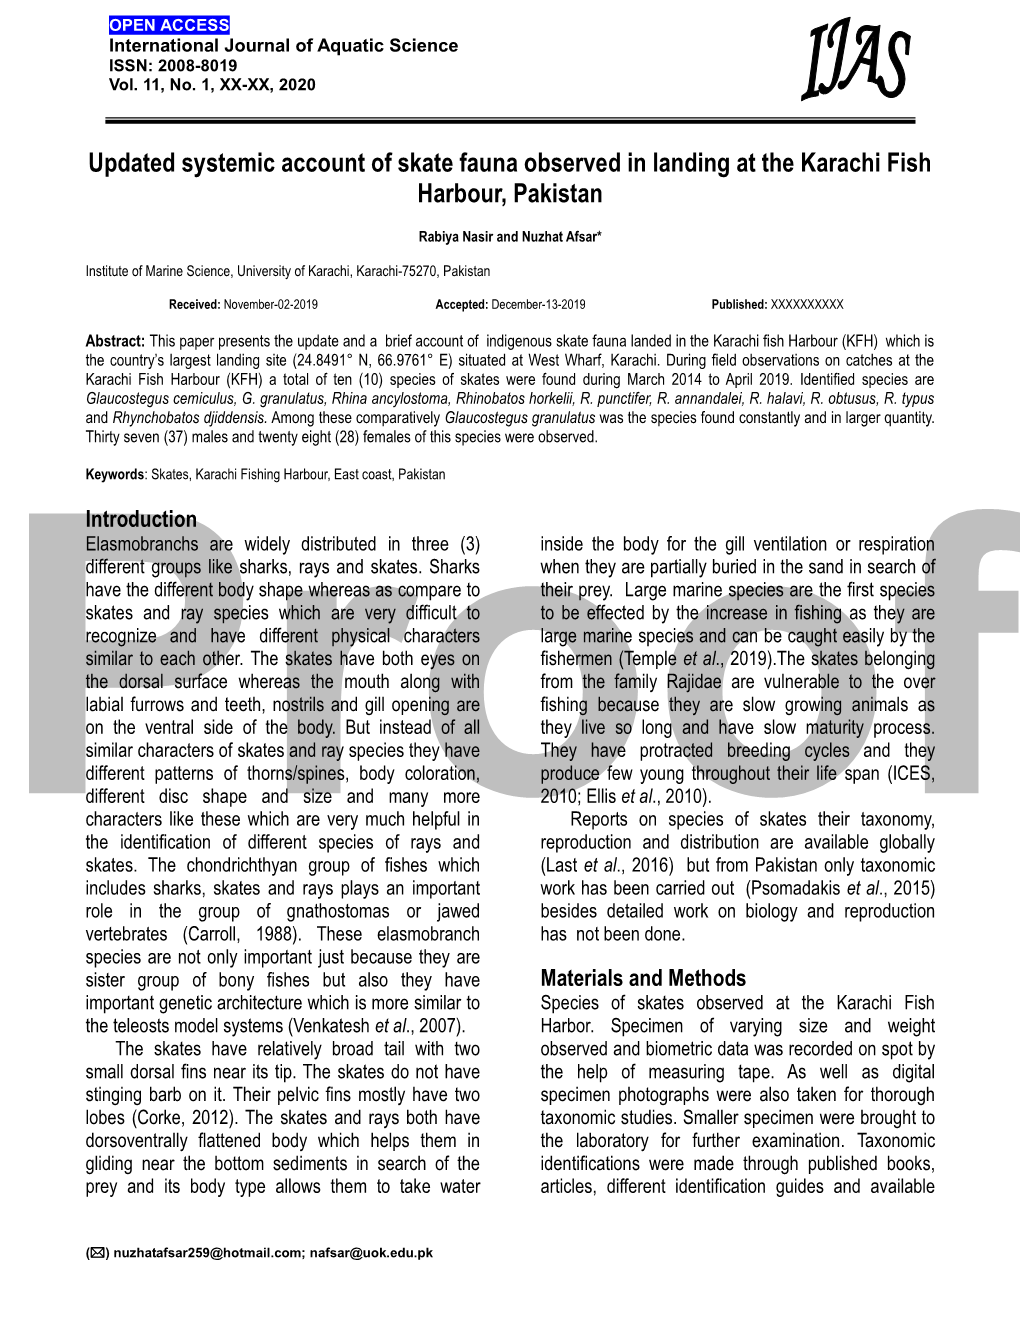 Updated Systemic Account of Skate Fauna Observed in Landing at the Karachi Fish Harbour, Pakistan